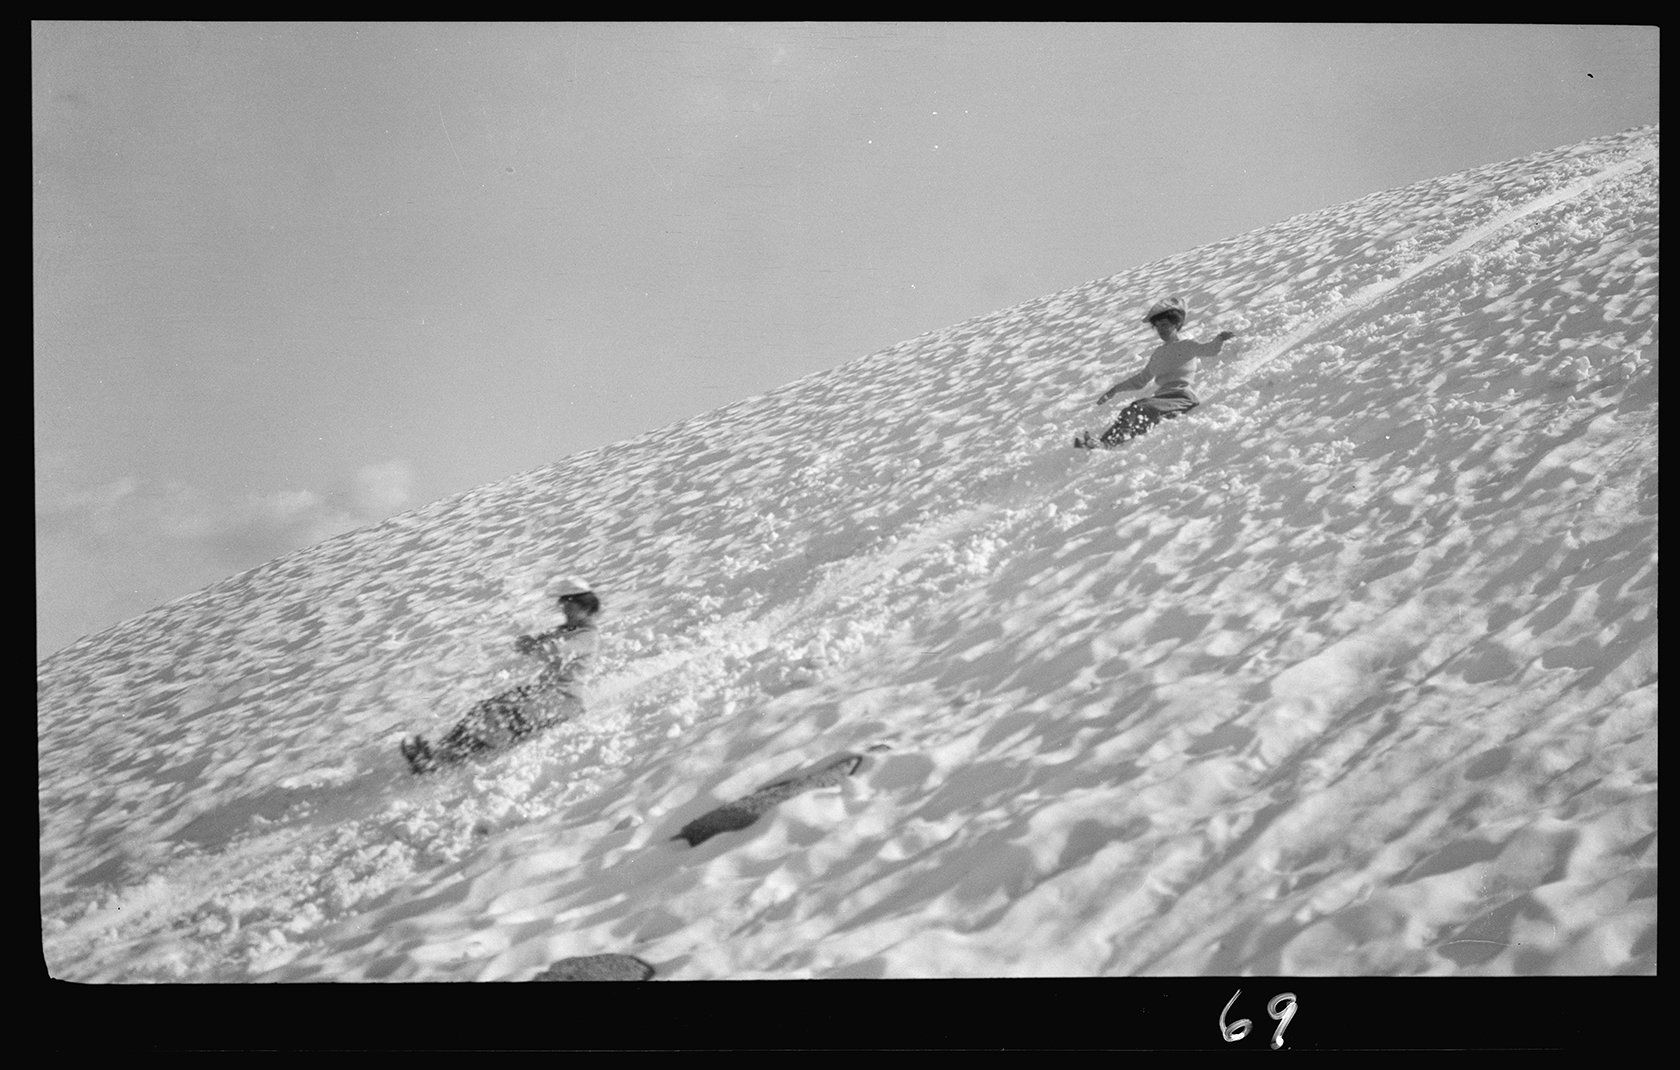 two women sled down a snowy hill